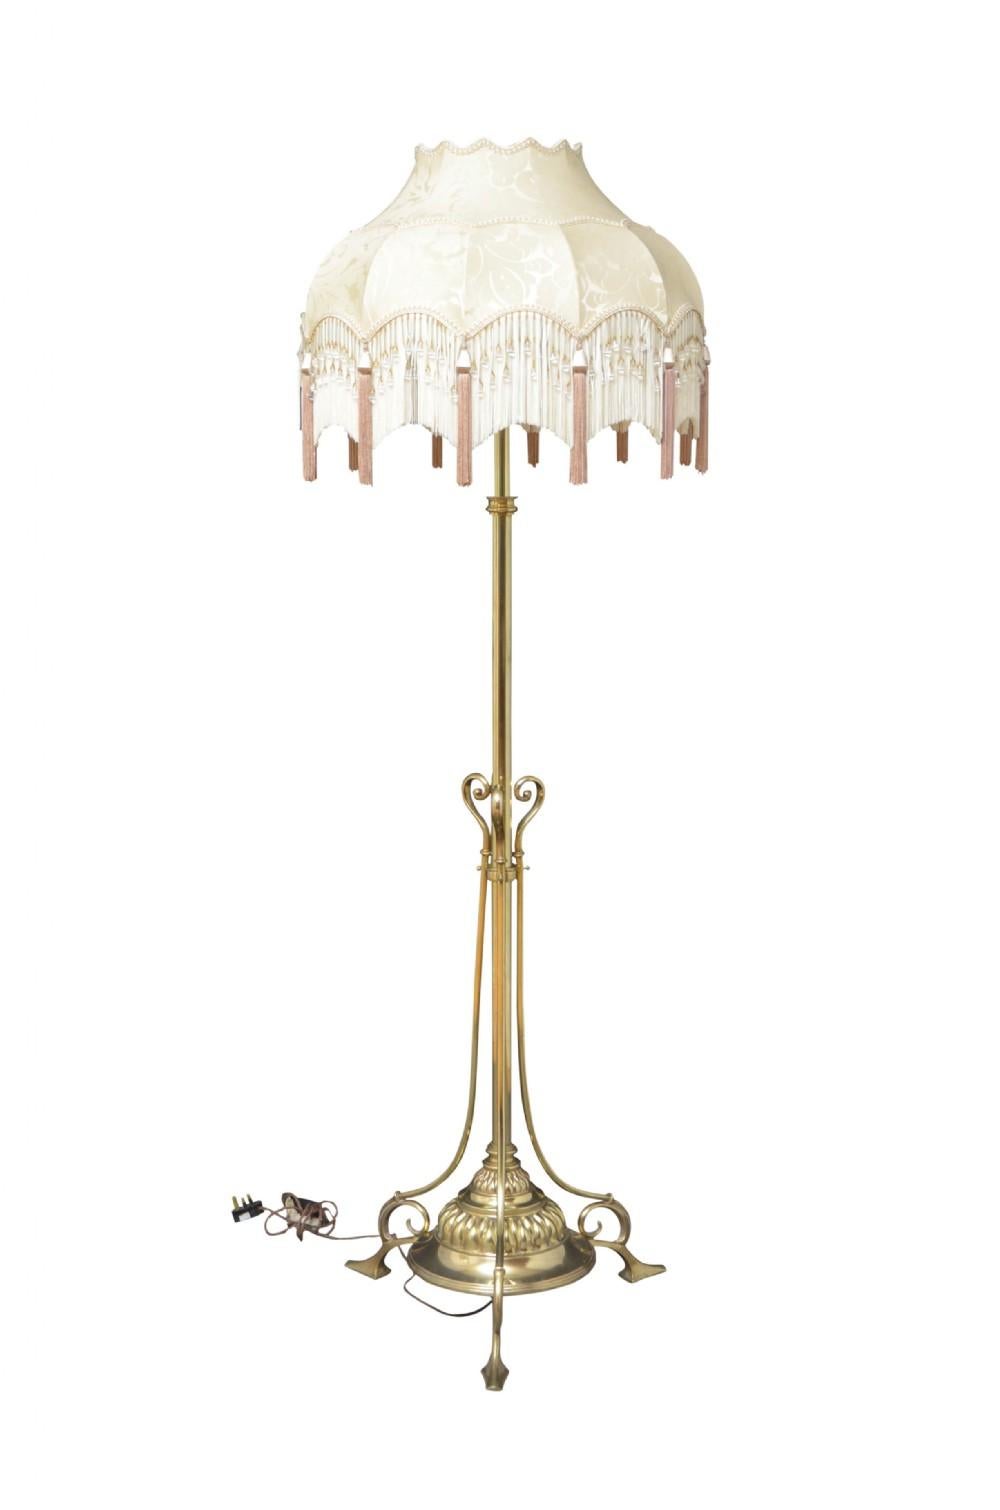 Late Victorian / Edwardian standard lamp, having adjustable column terminating in circular fluted base with three scroll supports and pad feet. This antique lamp has been cleaned, polished and professionally rewired. All in excellent home ready